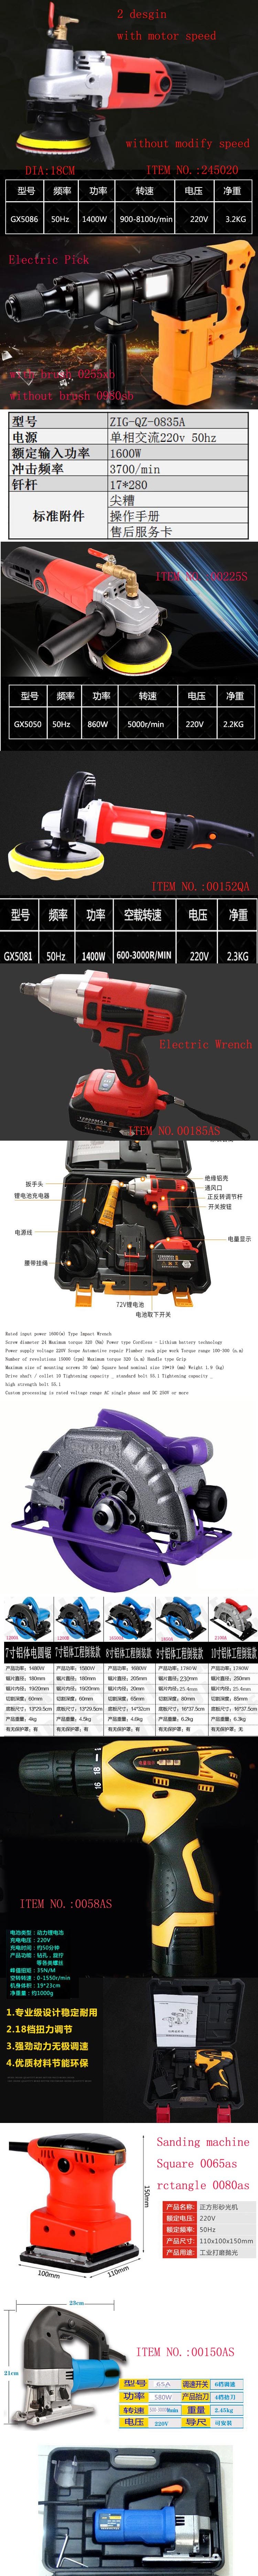 Wholesale Cheap Factory Price Different Type Hardware Ideal Portable Electric Hand Power Tools